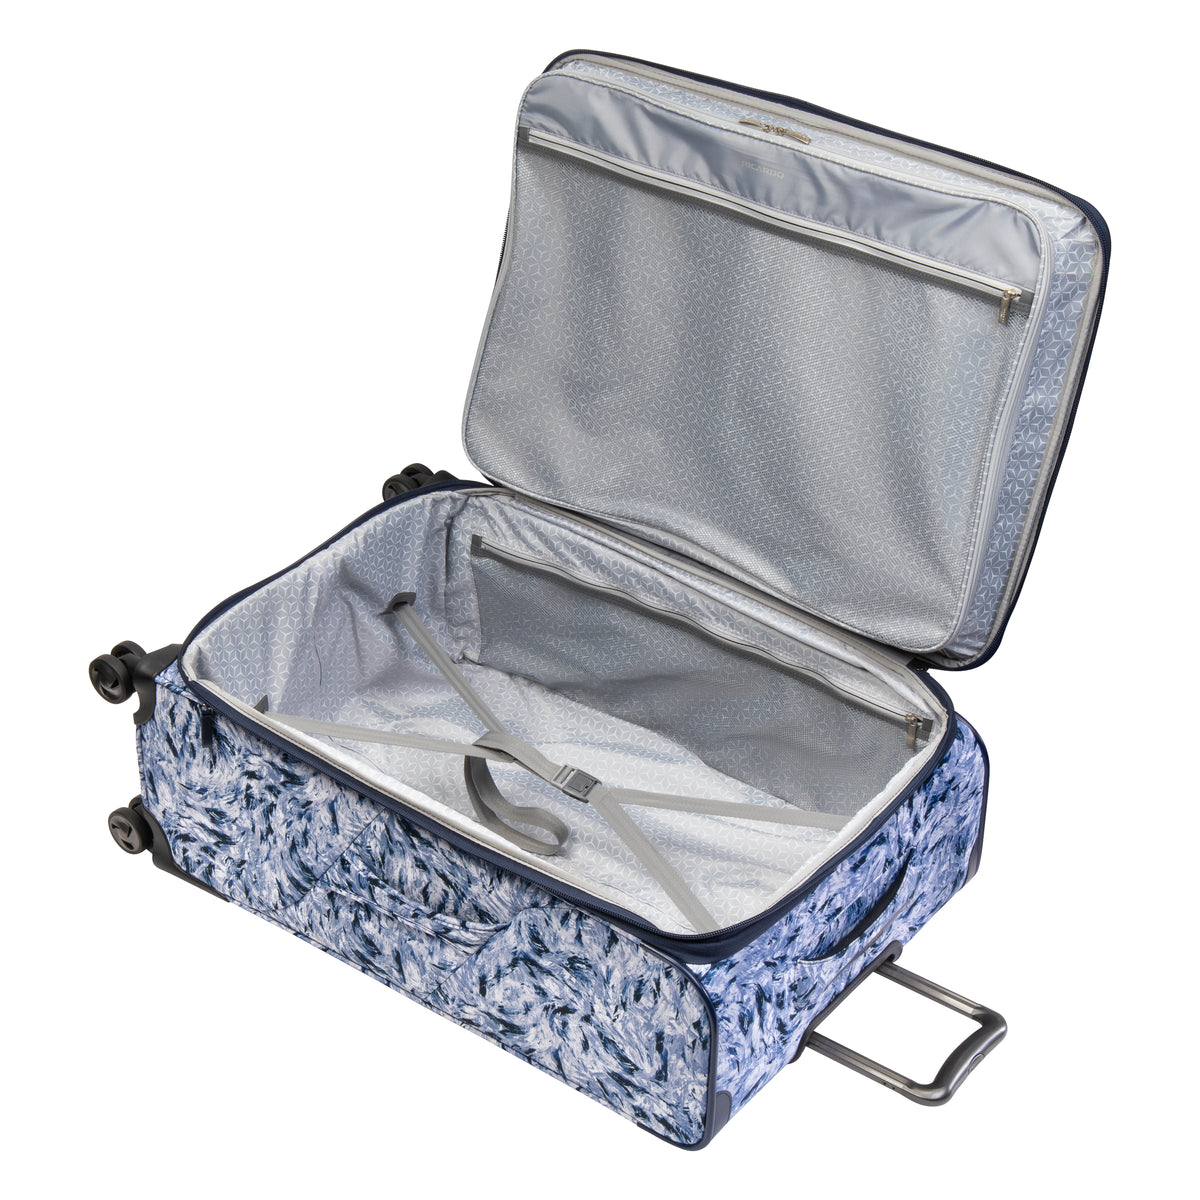 Seahaven 2.0 Softside Large Check-In Expandable Spinner